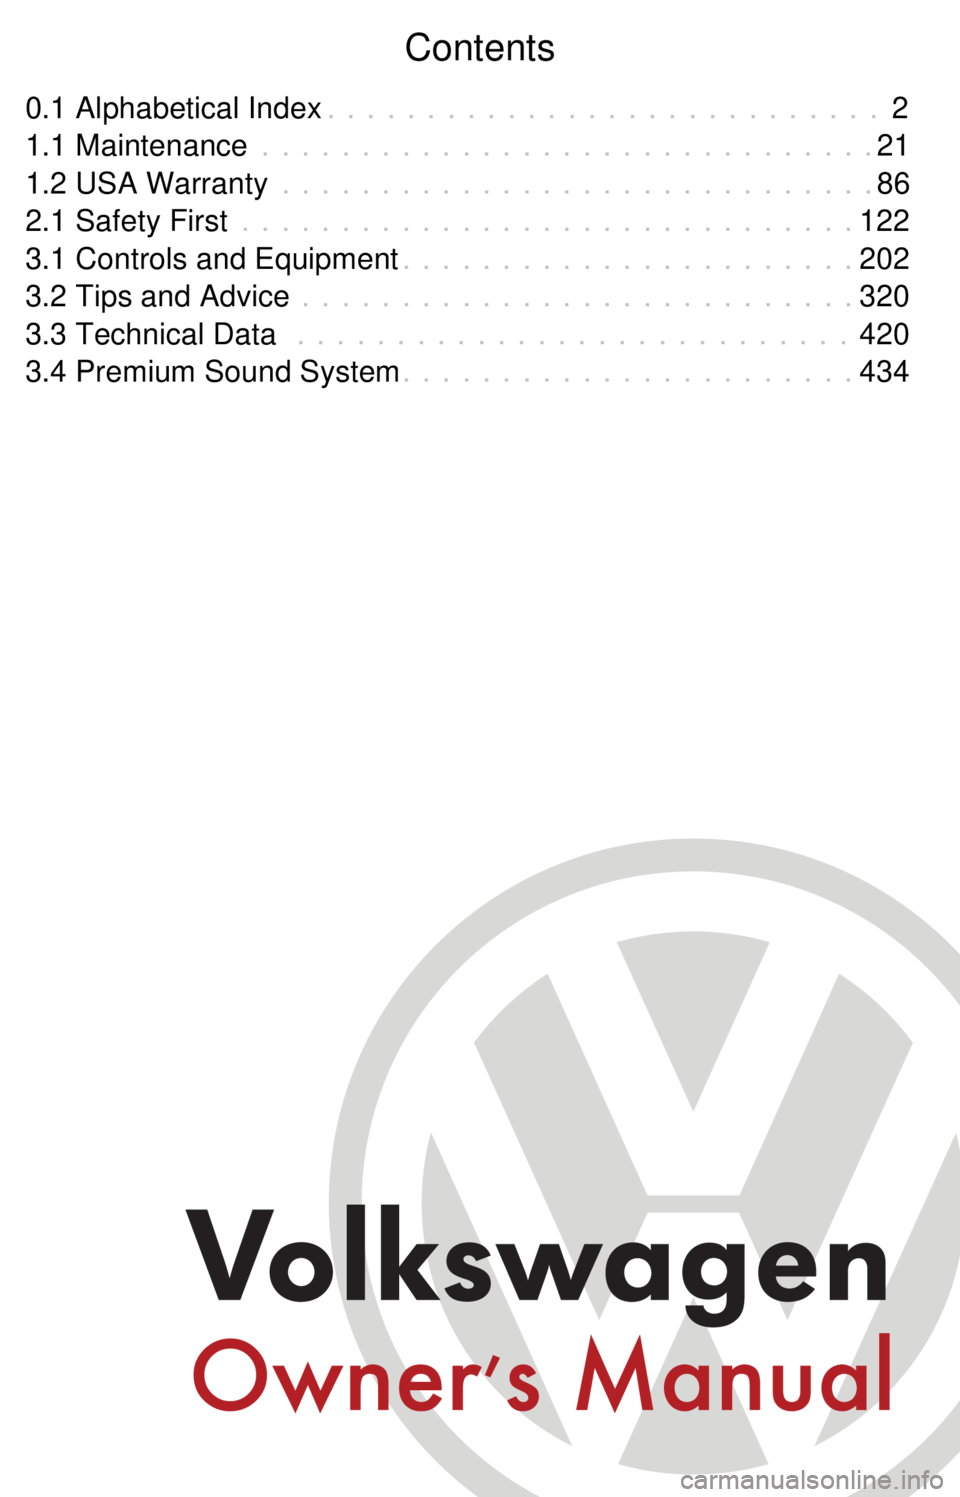 VOLKSWAGEN JETTA 2009  Owners Manual Contents
0.1 Alphabetical Index 2
. . . . . . . . . . . . . . . . . . . . . . . . . . . .
1.1 Maintenance 21
. . . . . . . . . . . . . . . . . . . . . . . . . . . . . . .
1.2 USA Warranty 86
. . . . .